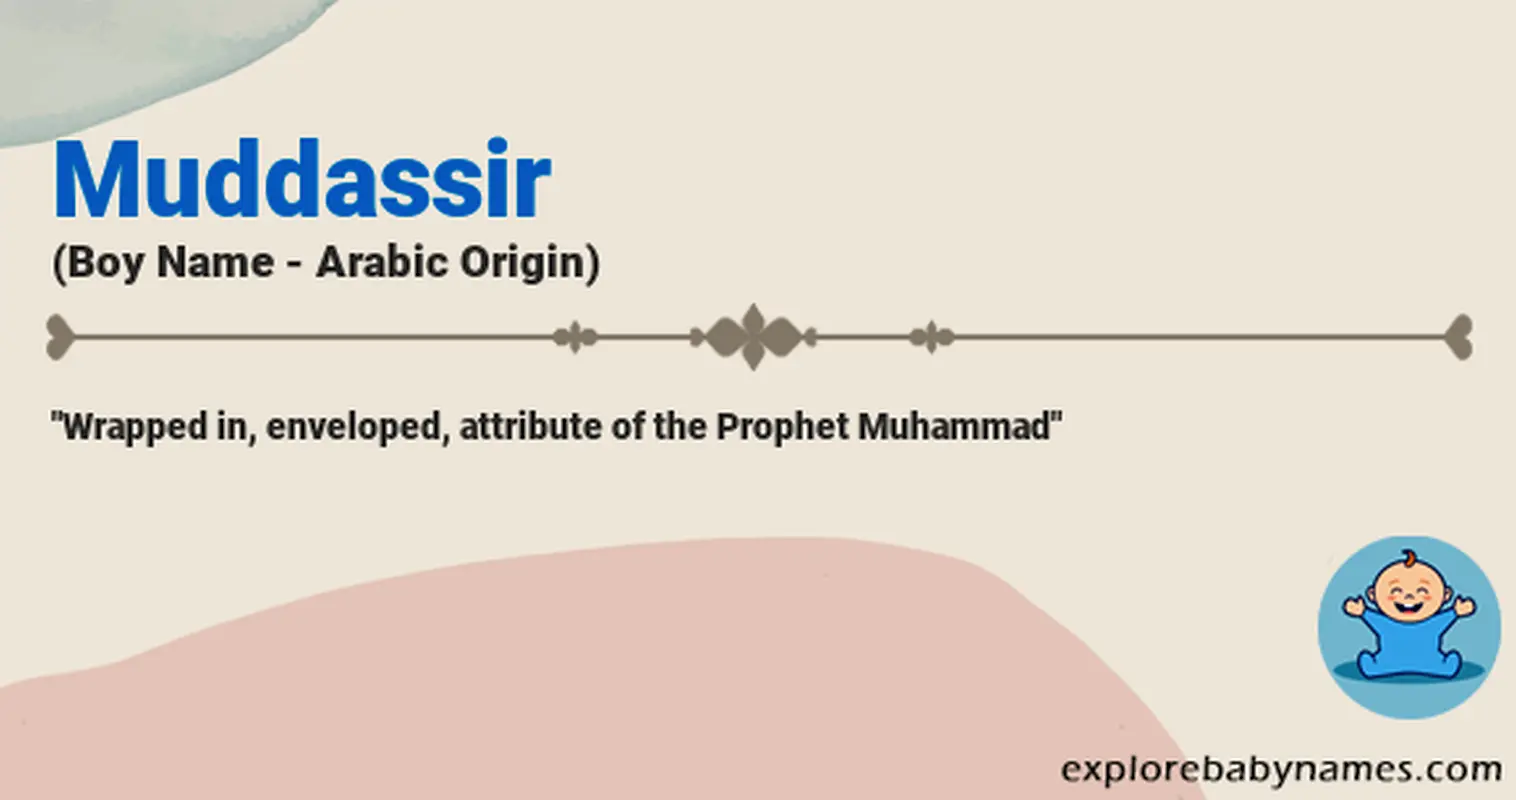 Meaning of Muddassir